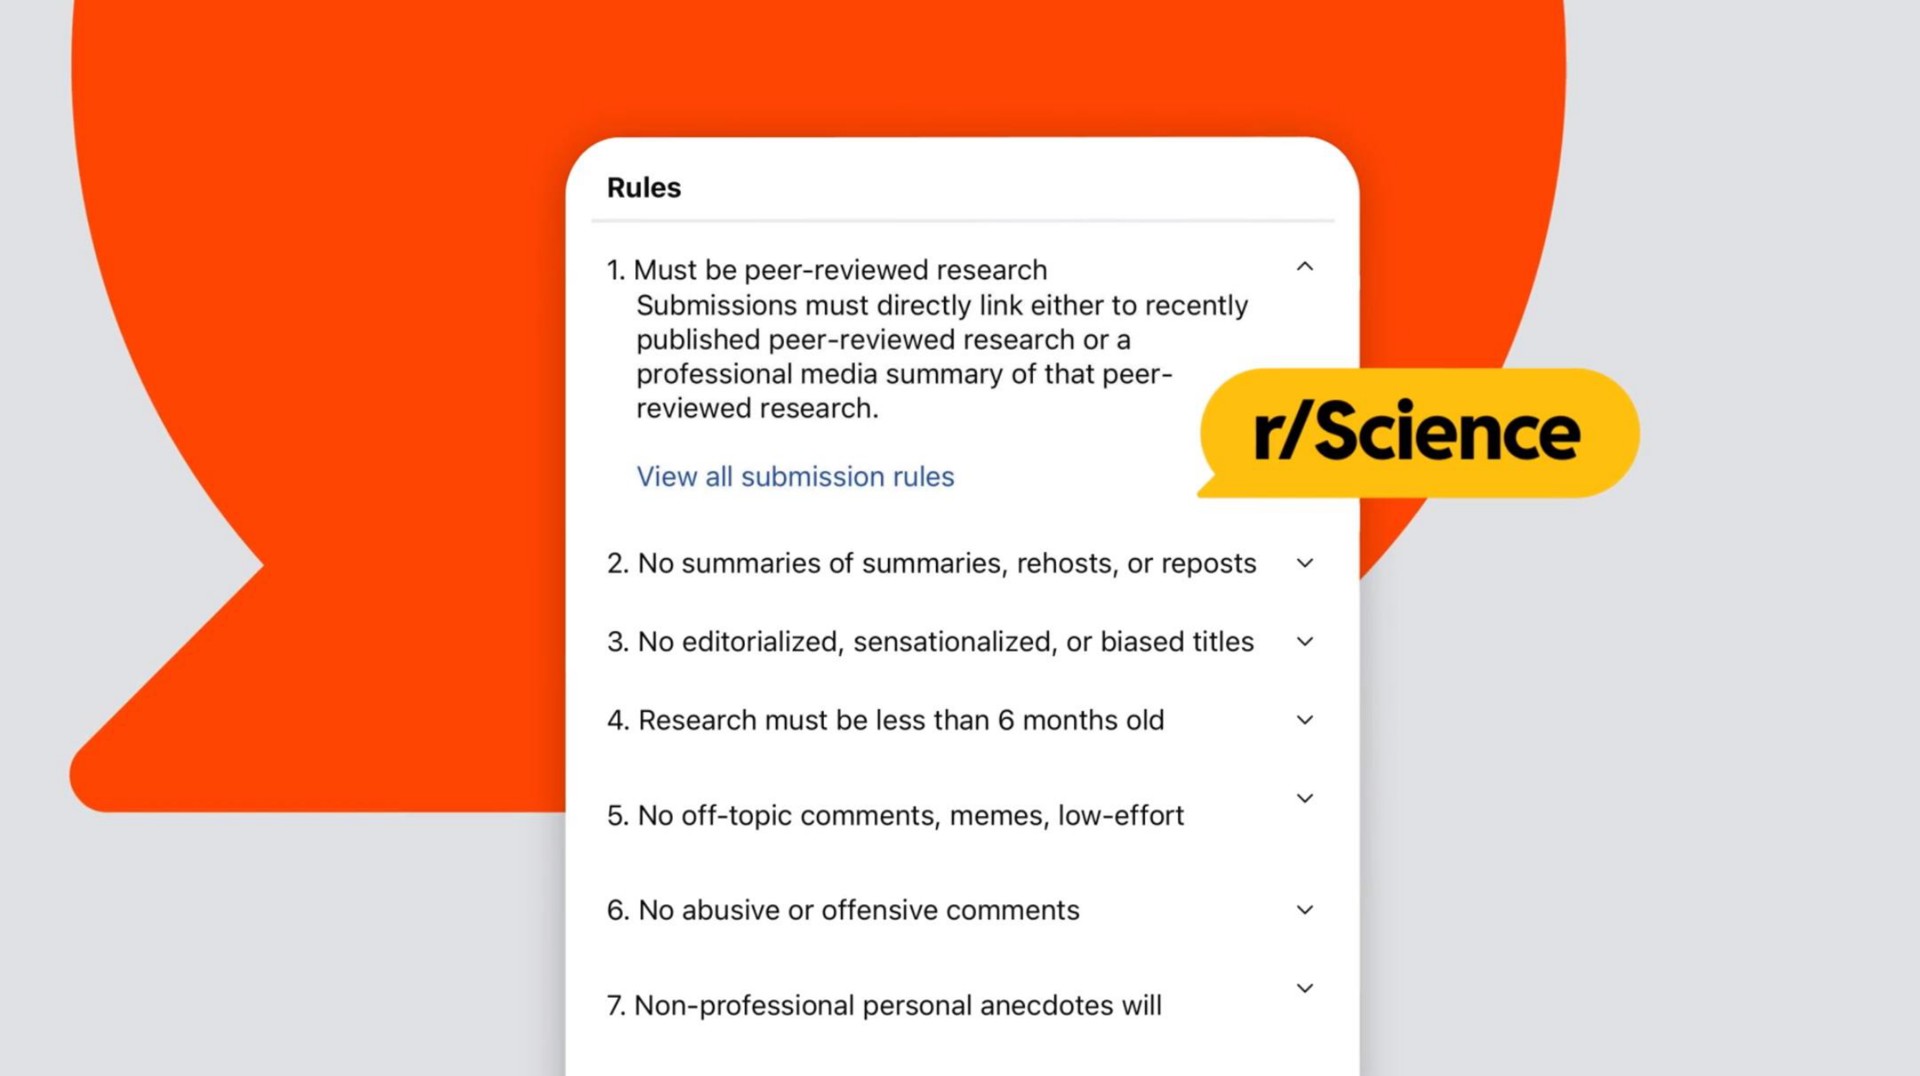 rules must be peer reviewed research submissions must directly link either to recently published peer reviewed research or a professional media summary of that peer reviewed research view all submission rules science no summaries of summaries or no editorialized or biased titles research must be less than months old no off topic comments low effort no abusive or offensive comments non professional personal anecdotes will | Reddit